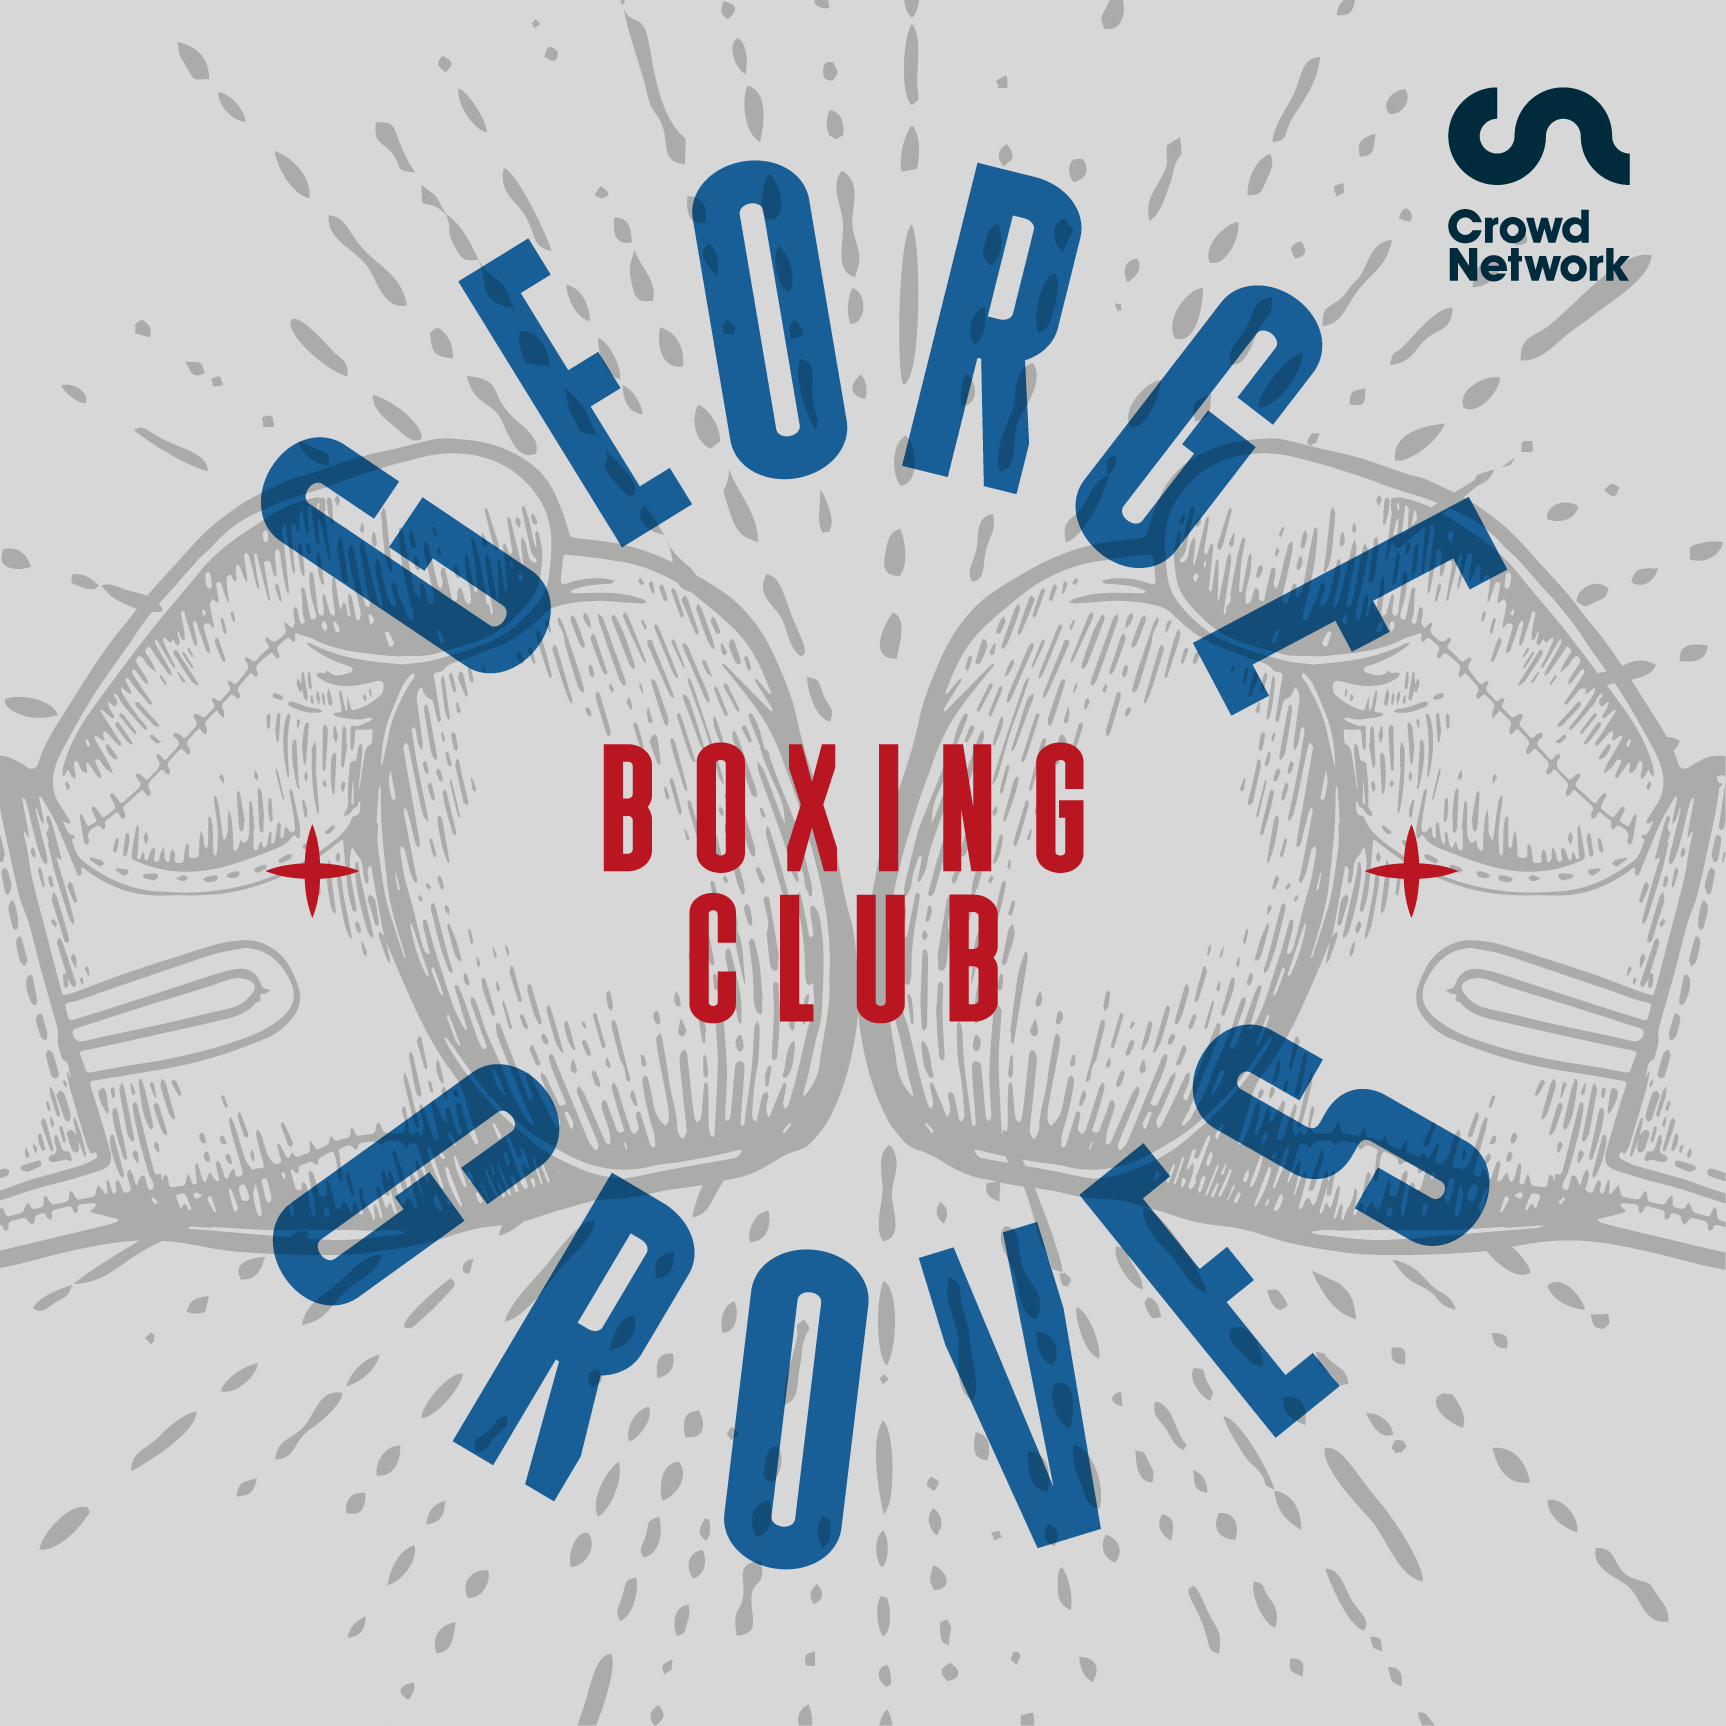 Crowd launches boxing community with George Groves